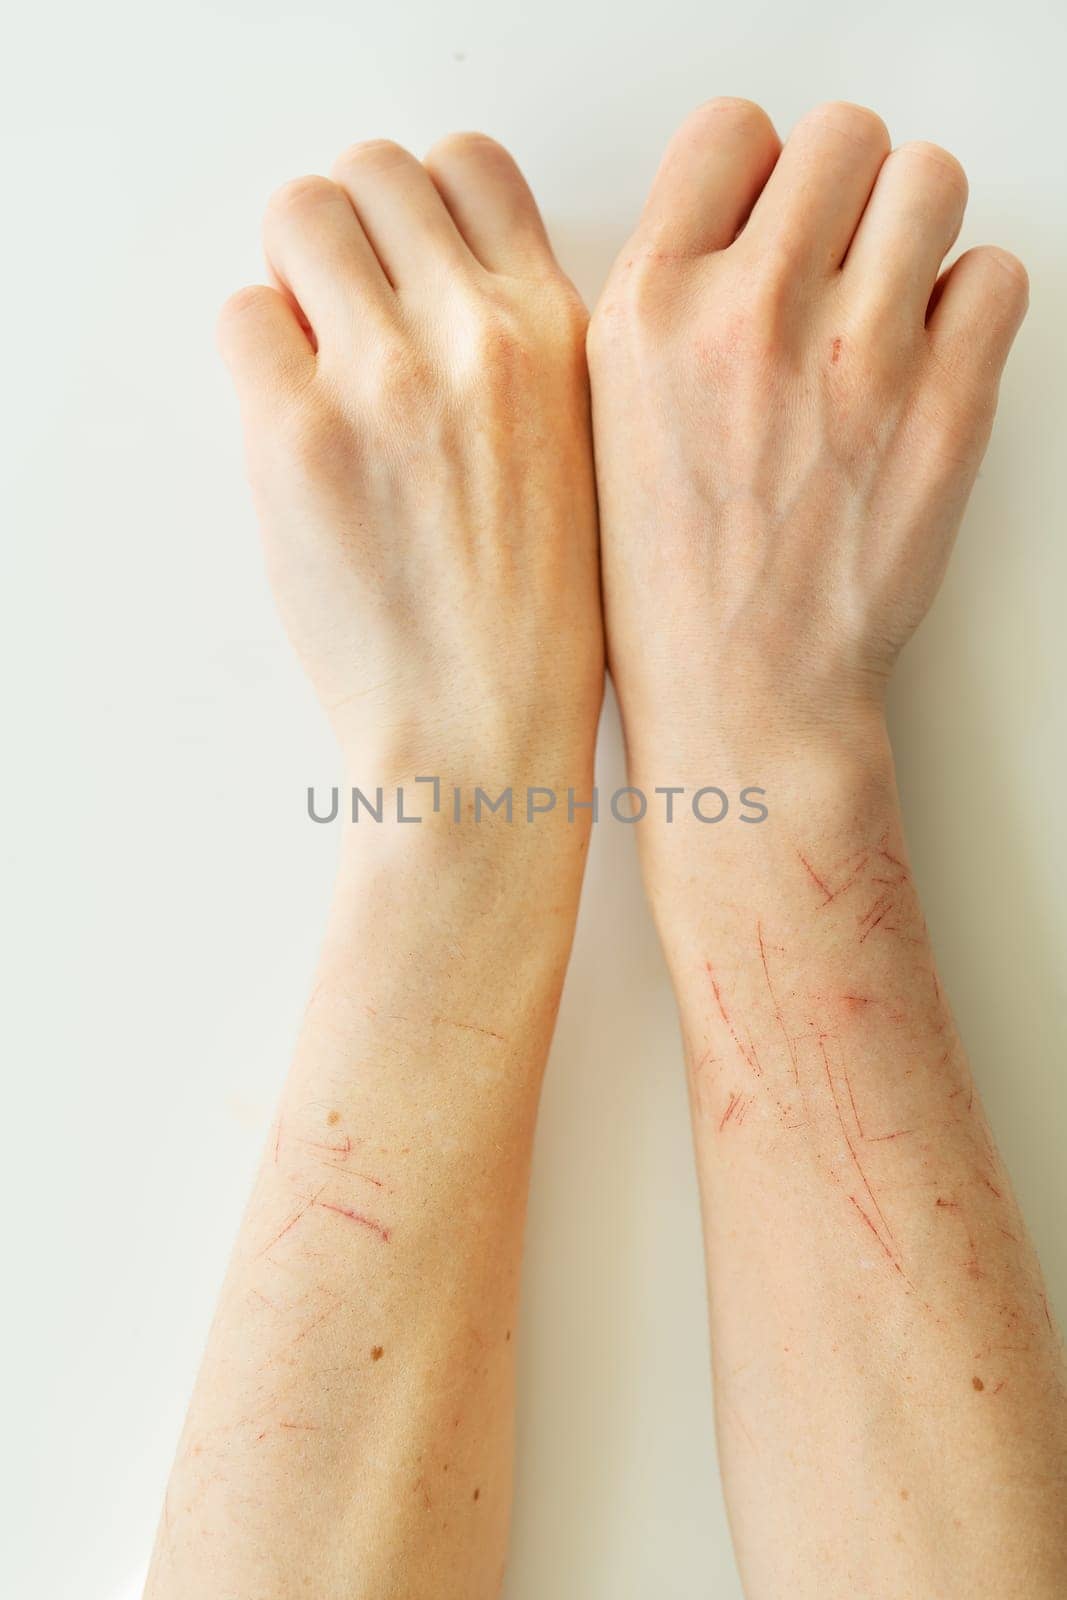 The person is scratched all over, dry skin on the arm, wounds on the arm, scars, psoriasis vulgaris, eczema or other skin diseases. Miscellaneous autoimmune genetic disease